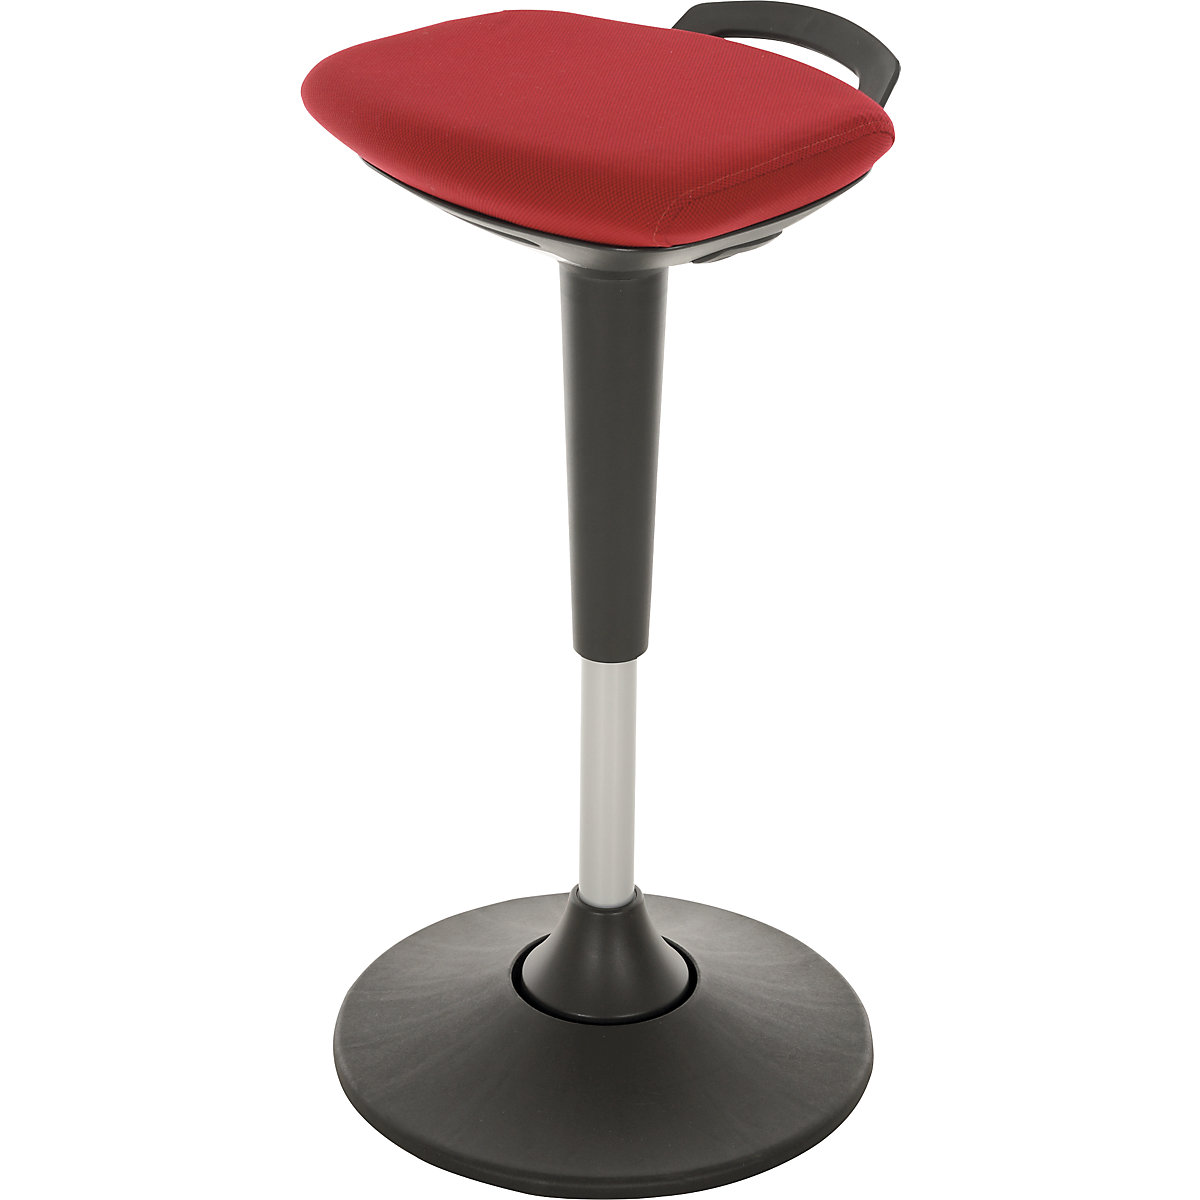 Flexible standing aid, height adjustable 600 – 840 mm, deep red cover-5